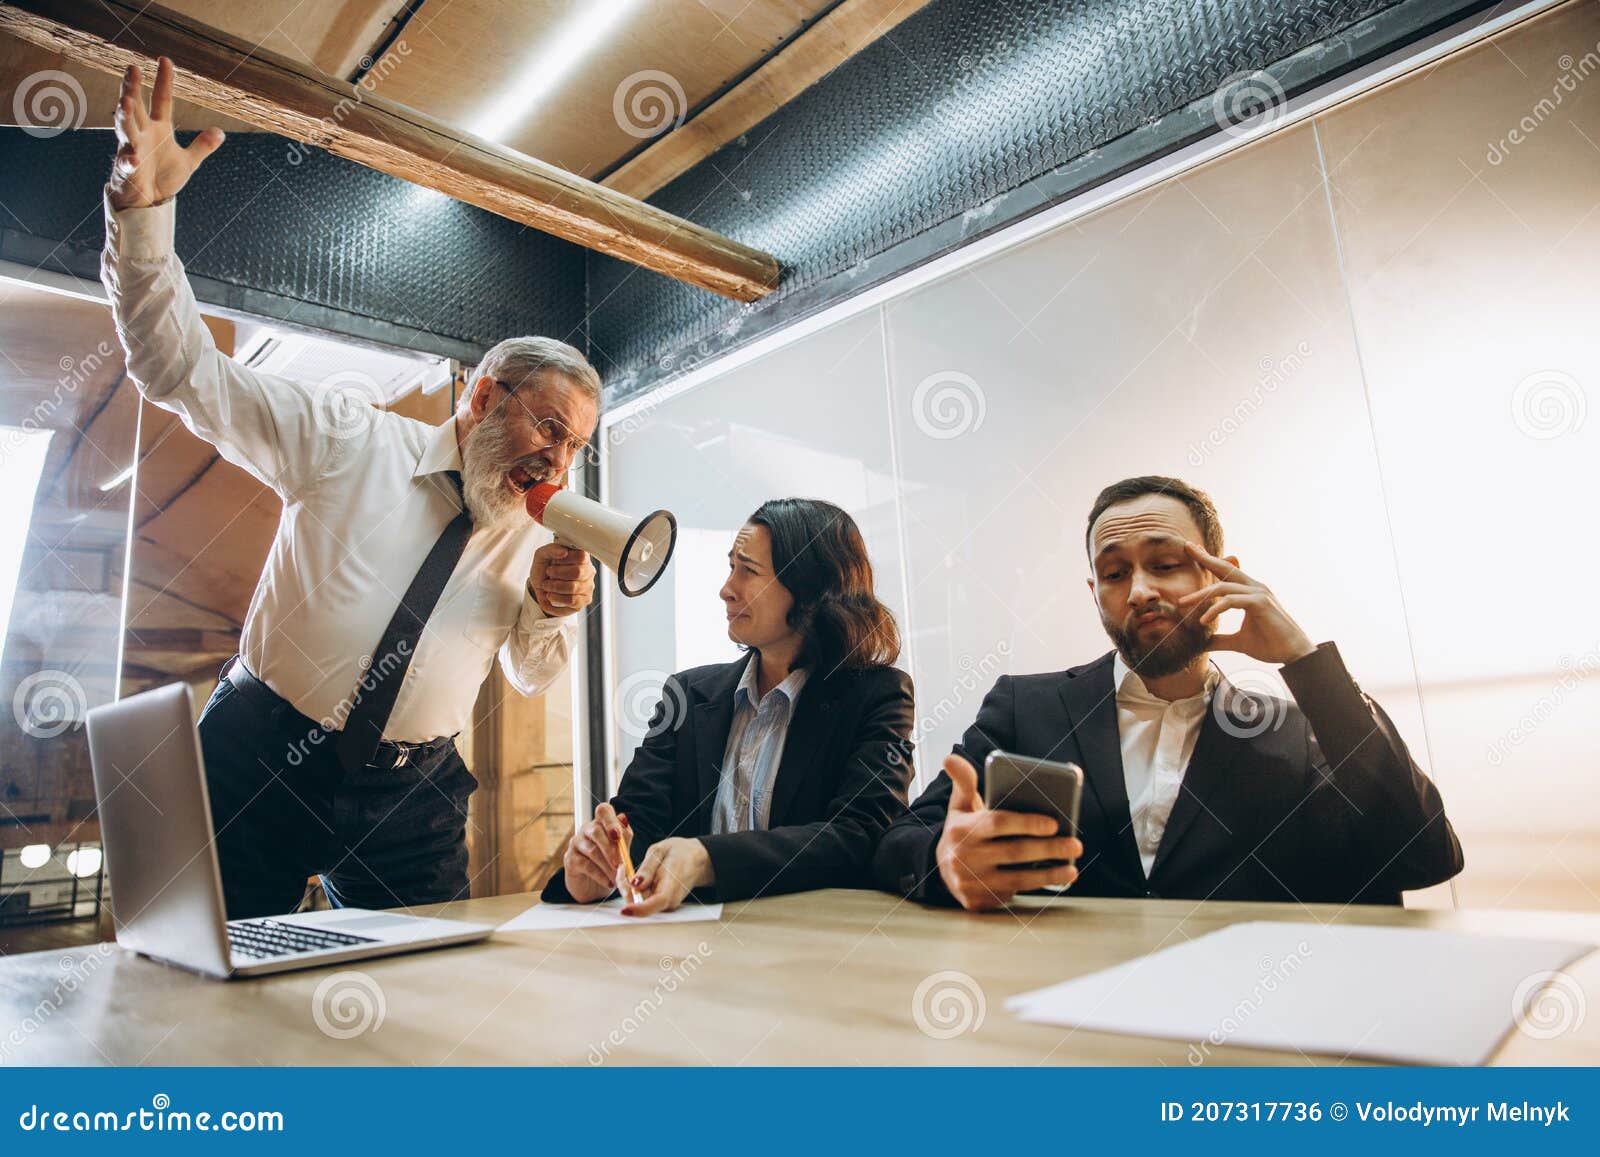 Angry Boss with Megaphone Screaming at Employees in Office, and Annoyed Colleagues Listening at the Table Stock Photo - Image of public, boss: 207317736